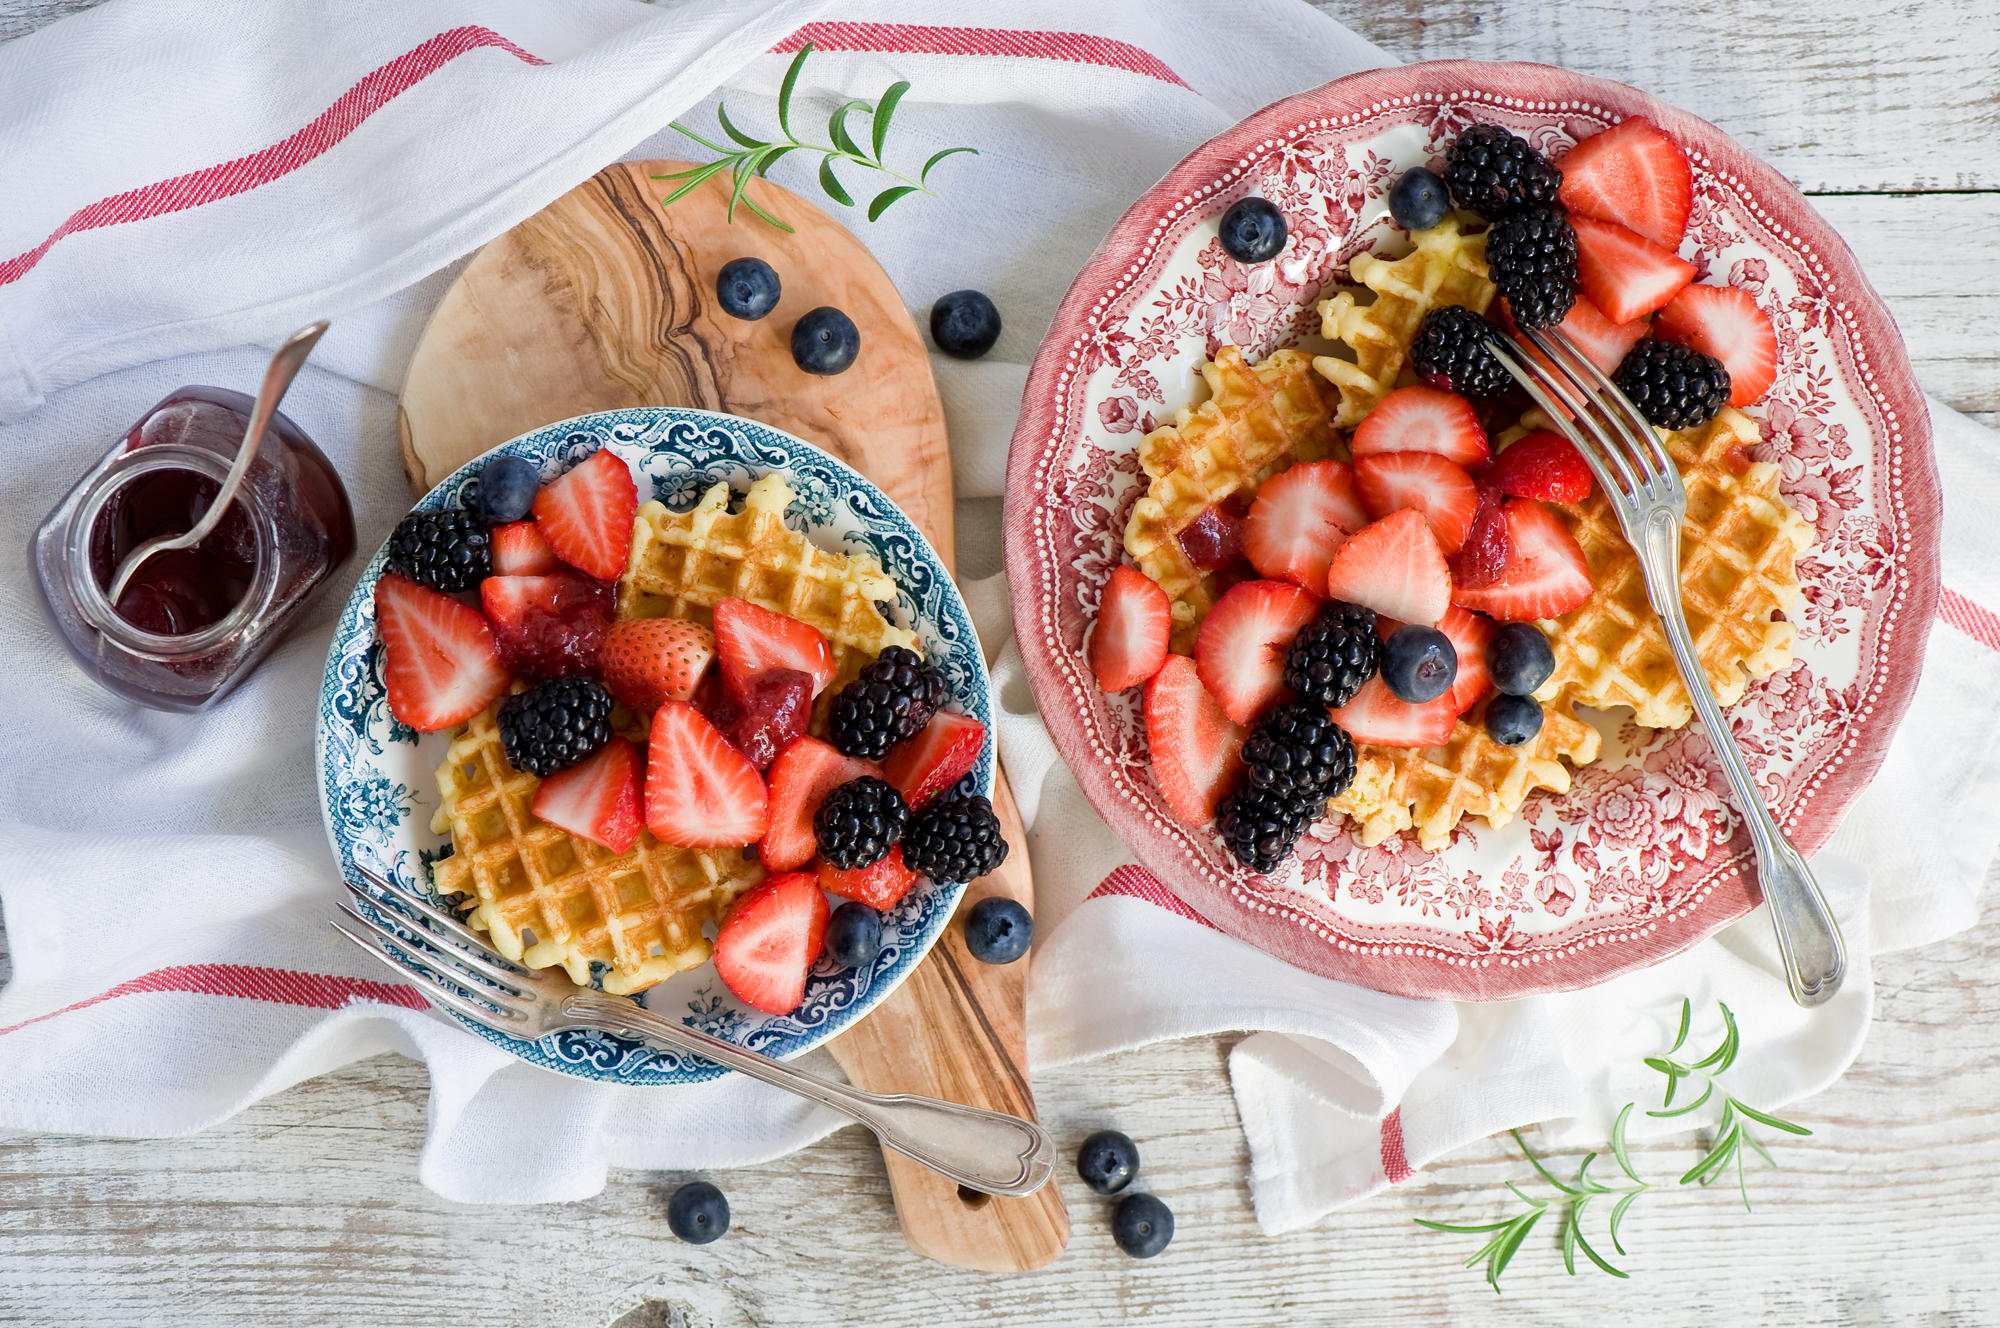 72655 download wallpaper food, waffles, bilberries, blackberry, breakfast screensavers and pictures for free